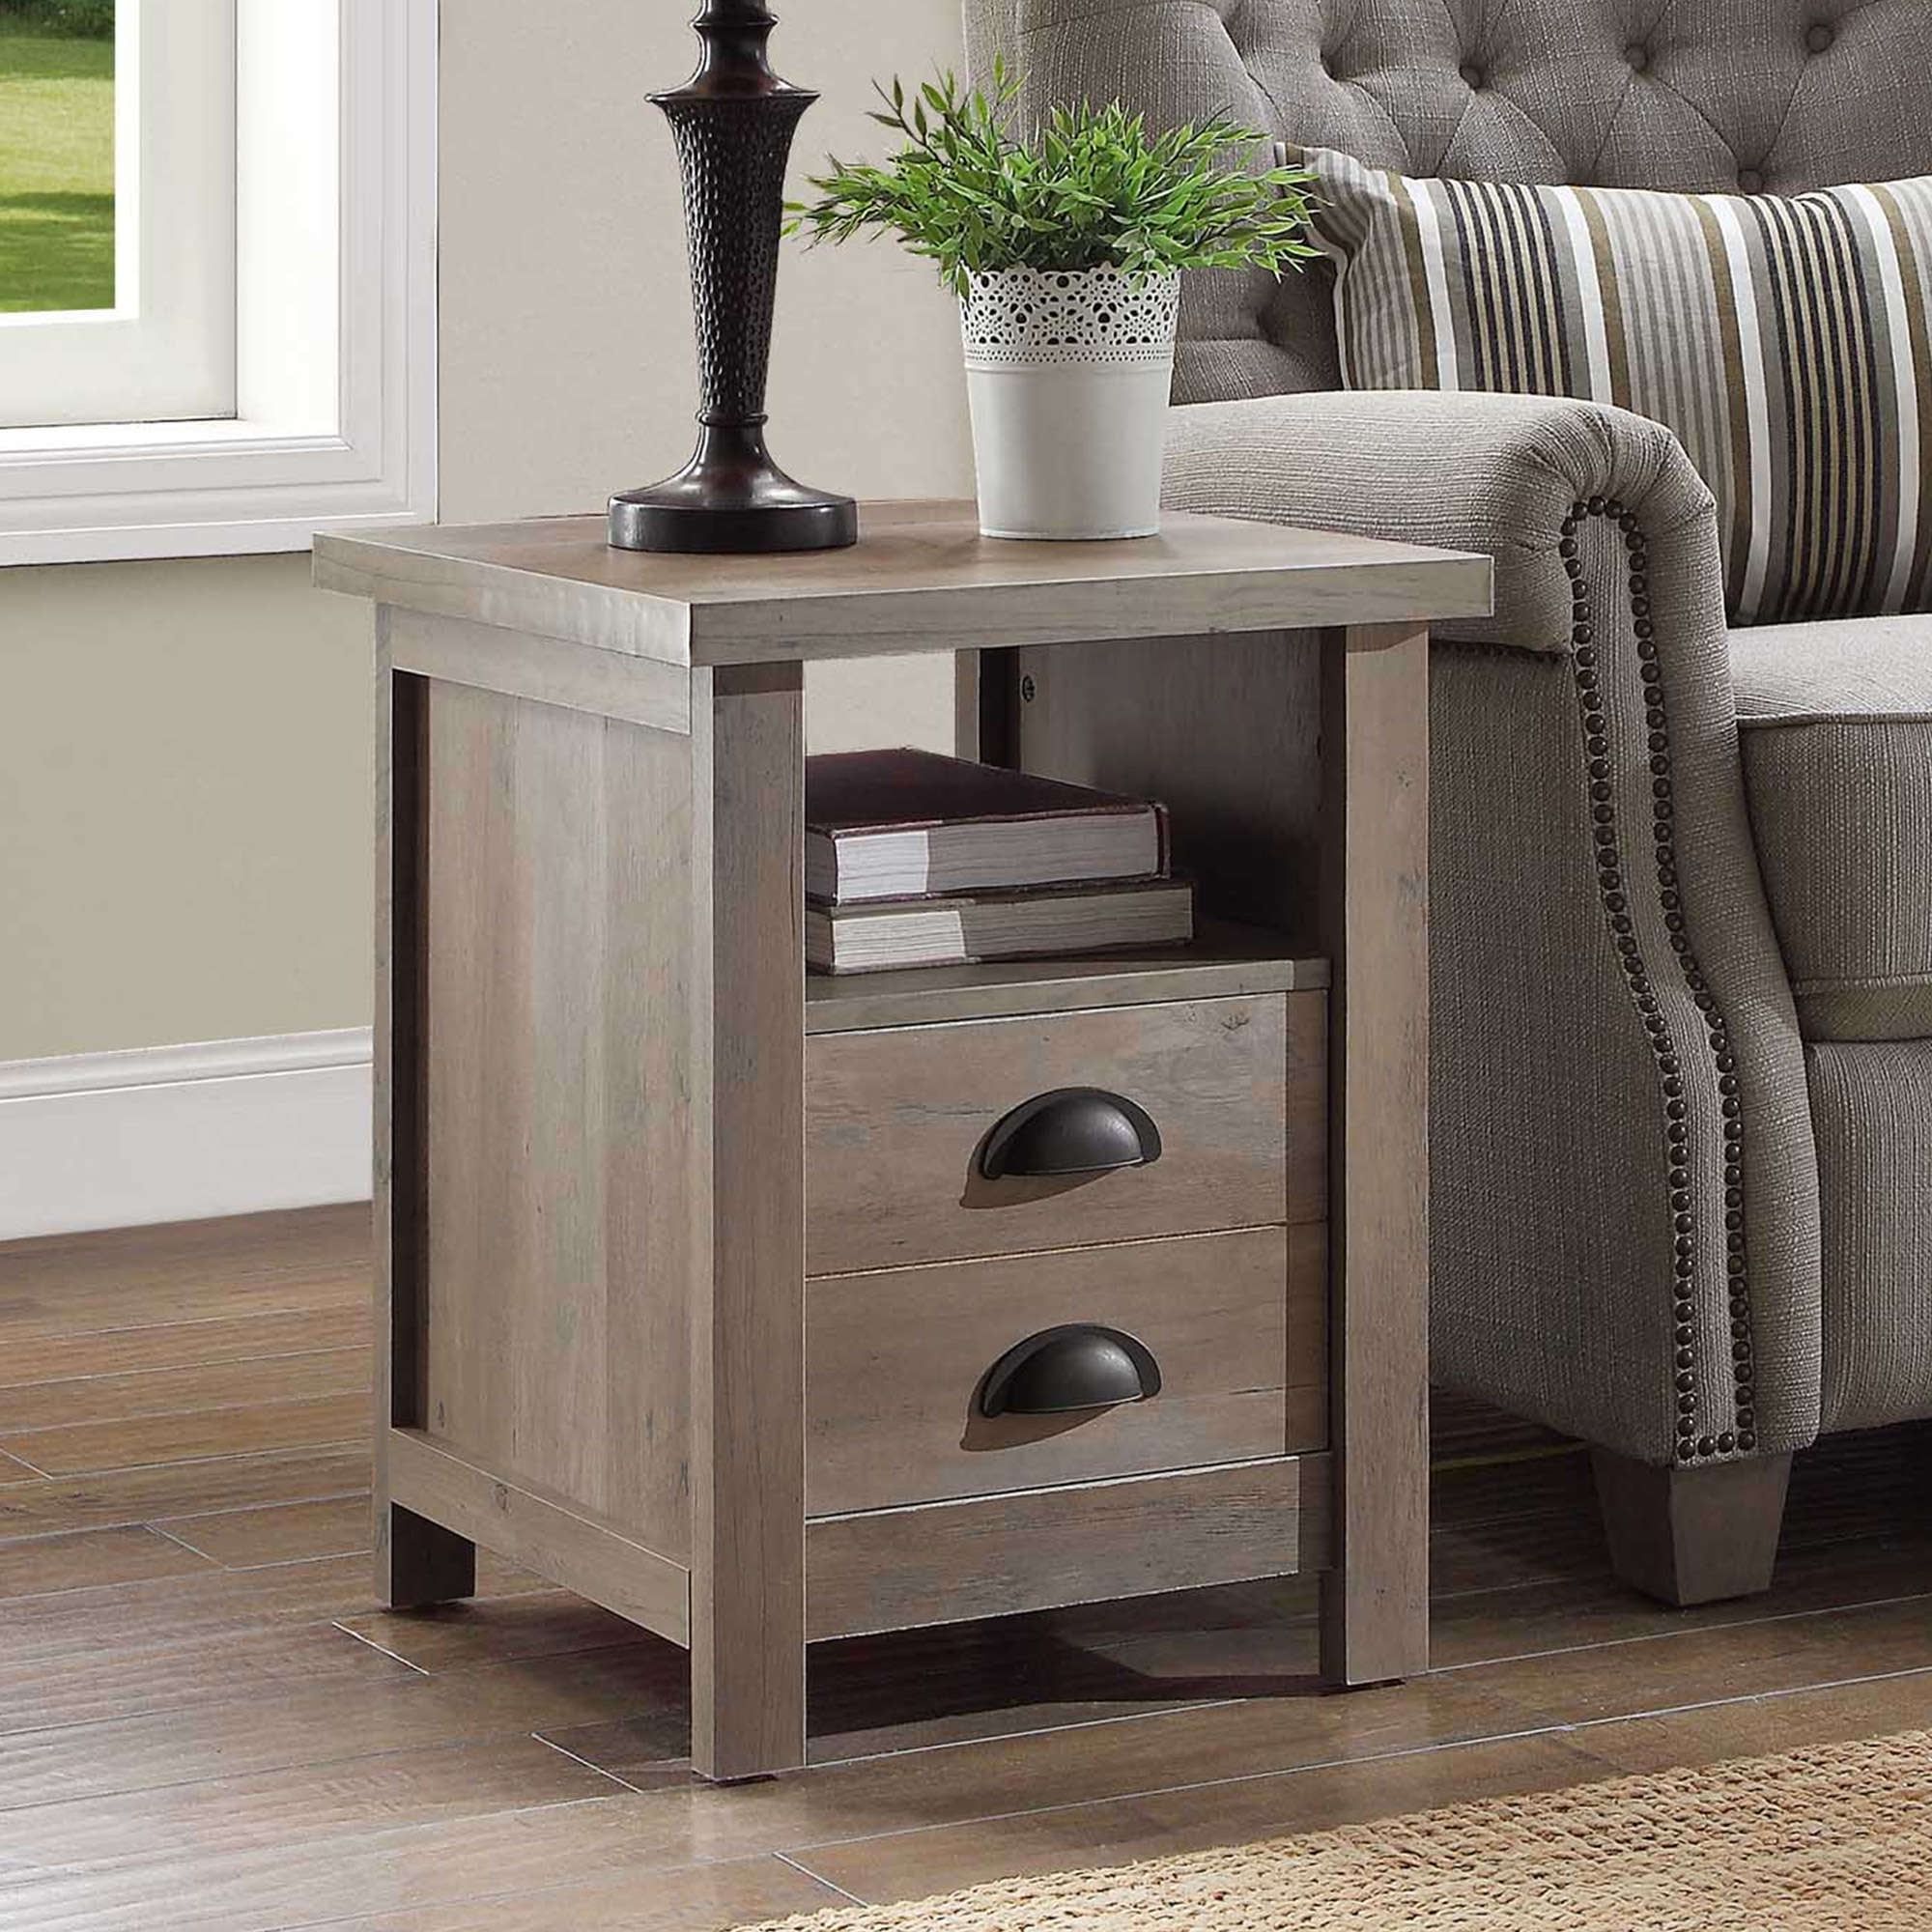 Widely Used Homes And Gardens Granary Modern Farmhouse End Table Rustic Gray For Rustic Gray End Tables (View 5 of 15)